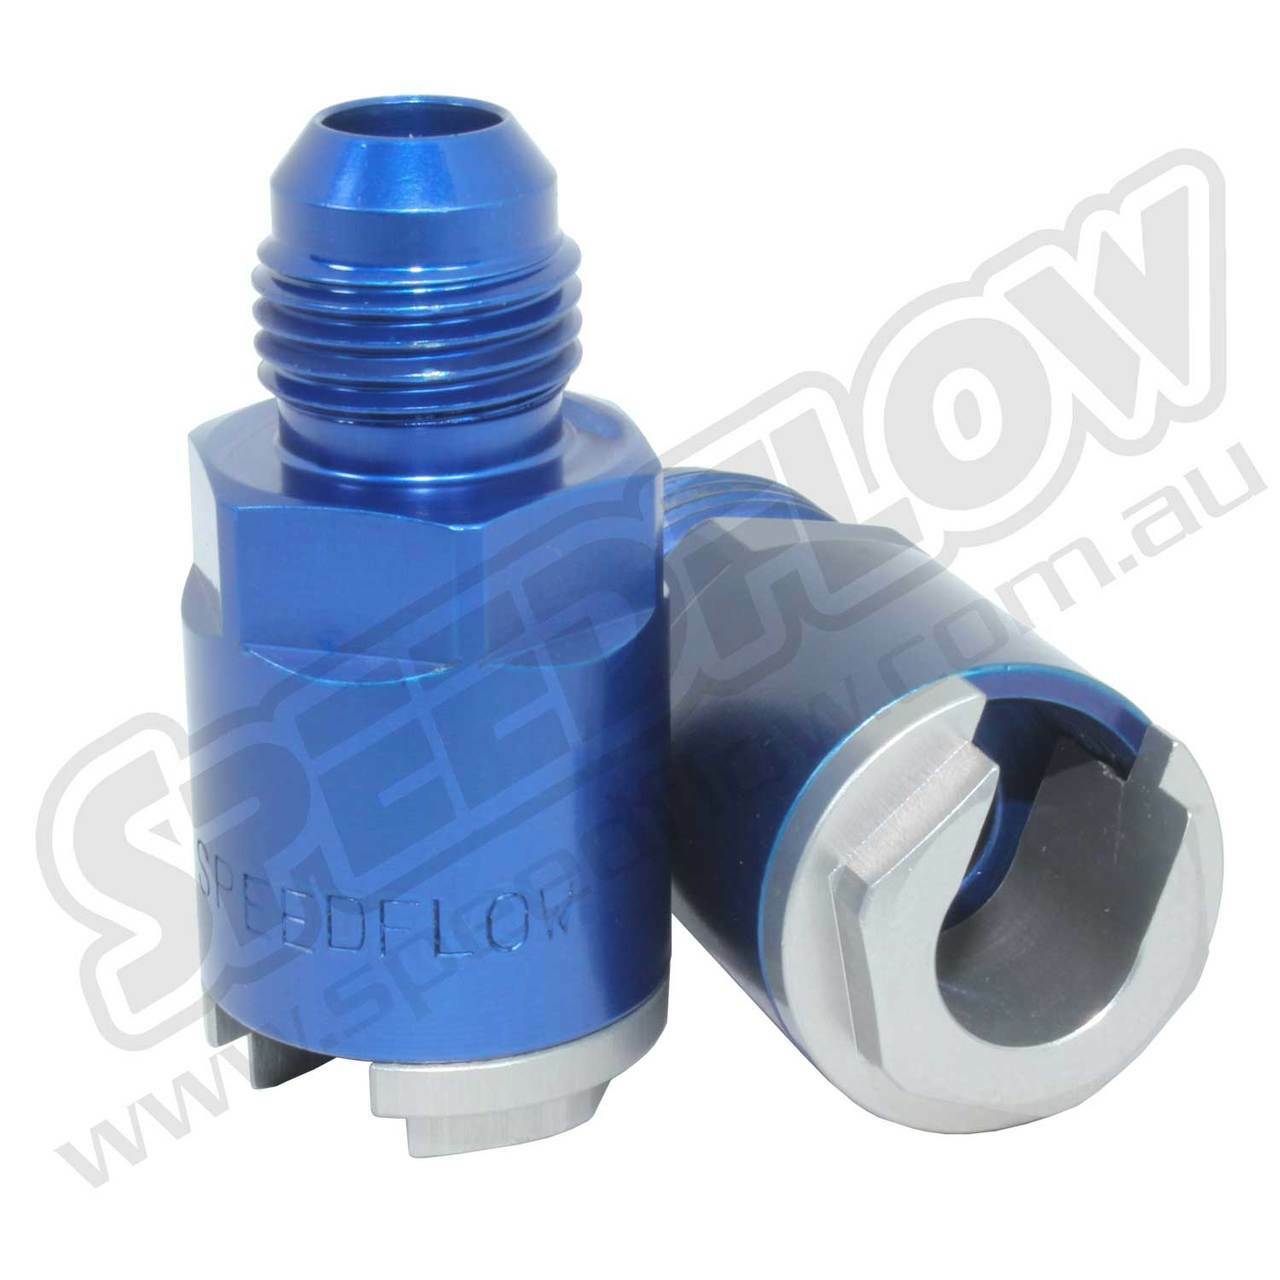 Speedflow AN Male To EFI Tube Adapter